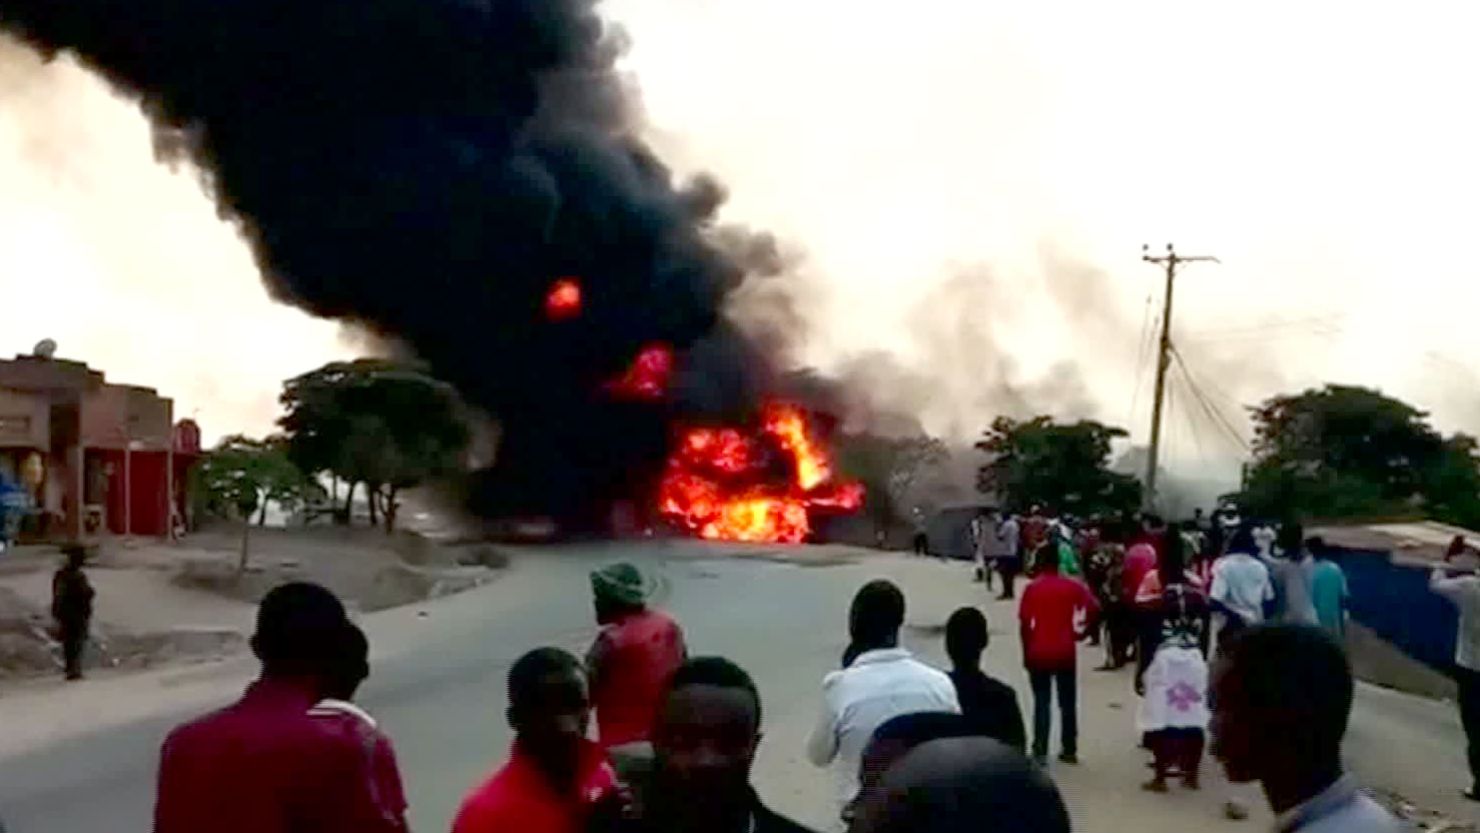 Flames and dense smoke rise from the scene of Sunday's explosion in Uganda.